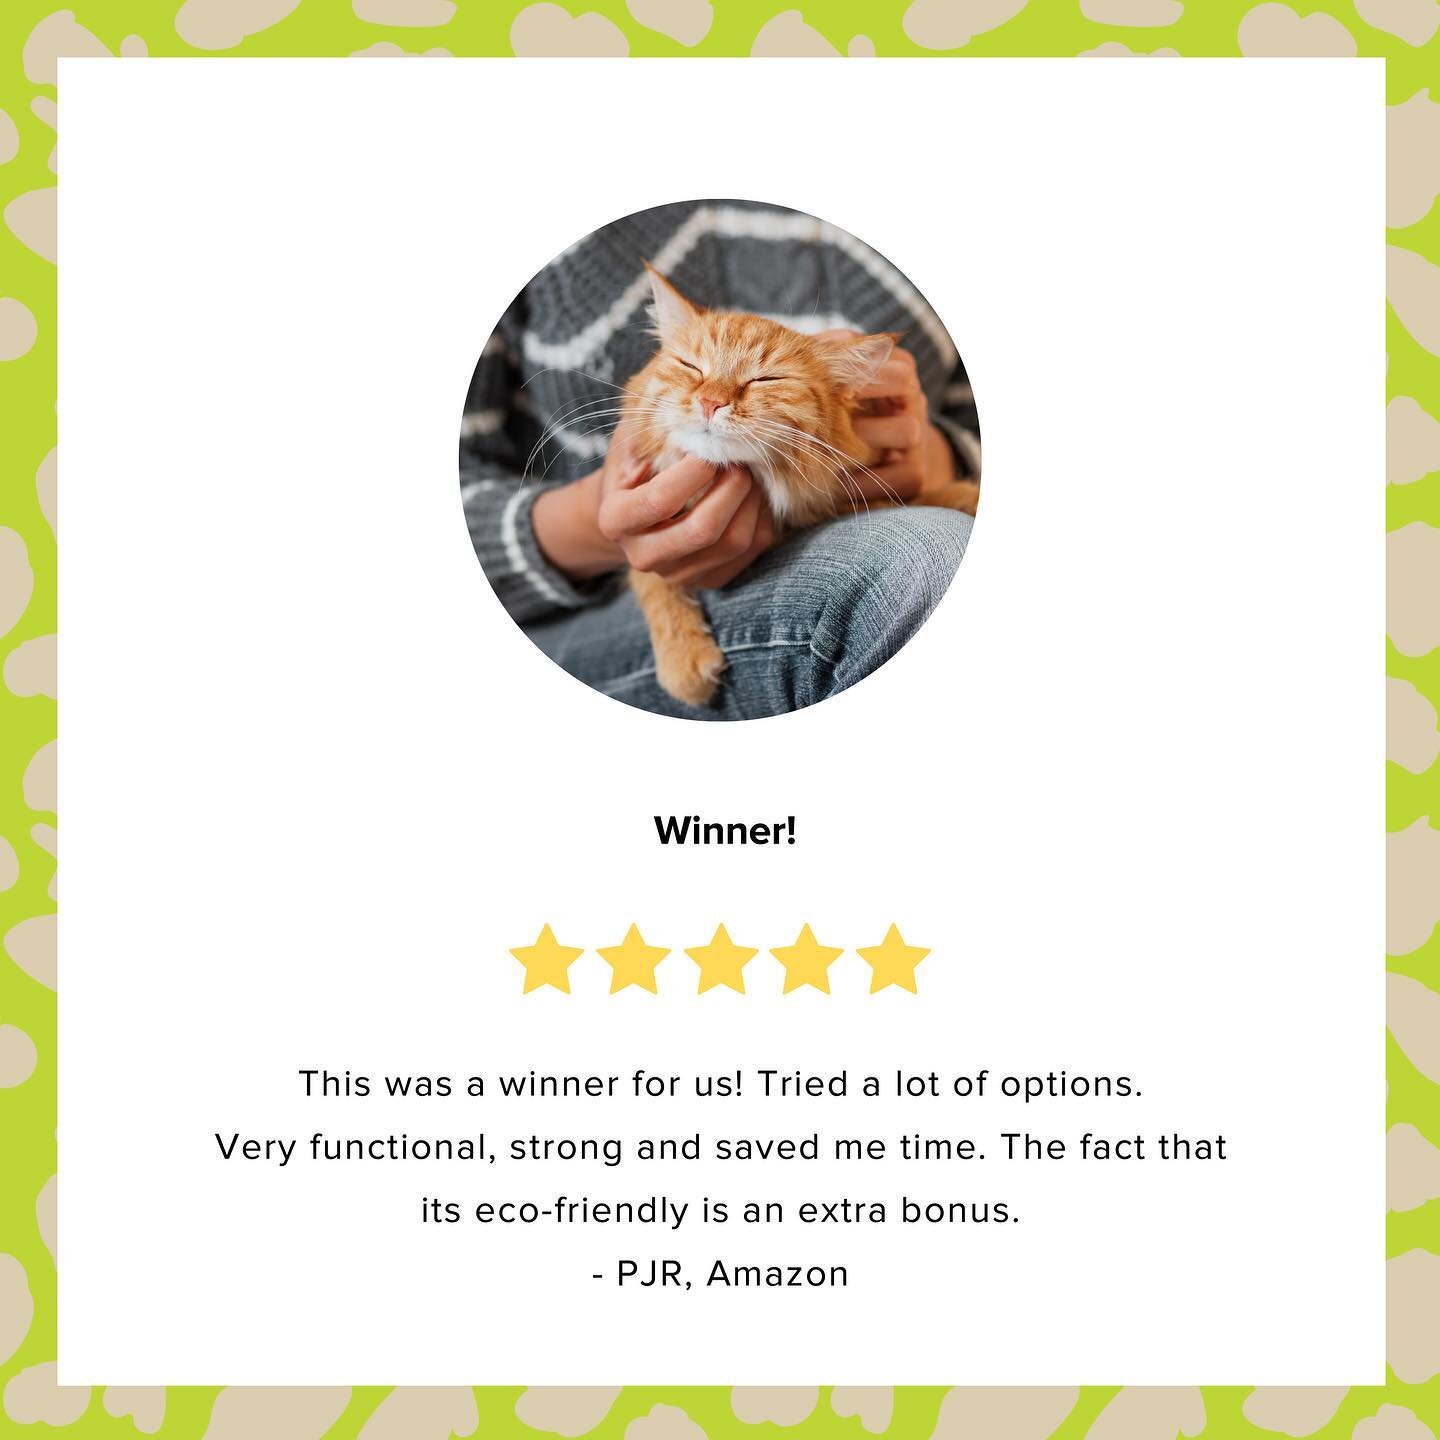 Do you prefer to do your shopping on @amazon ? We got you! Get Sift Done with FREE Prime Delivery! 😻

.
.
.
.
.
#kittysift #cathealth #litterbox #catlover #catlovers #catsofinstagram #kitty #catstagram #rescuecat #catoftheday #catlife #instacat #kit